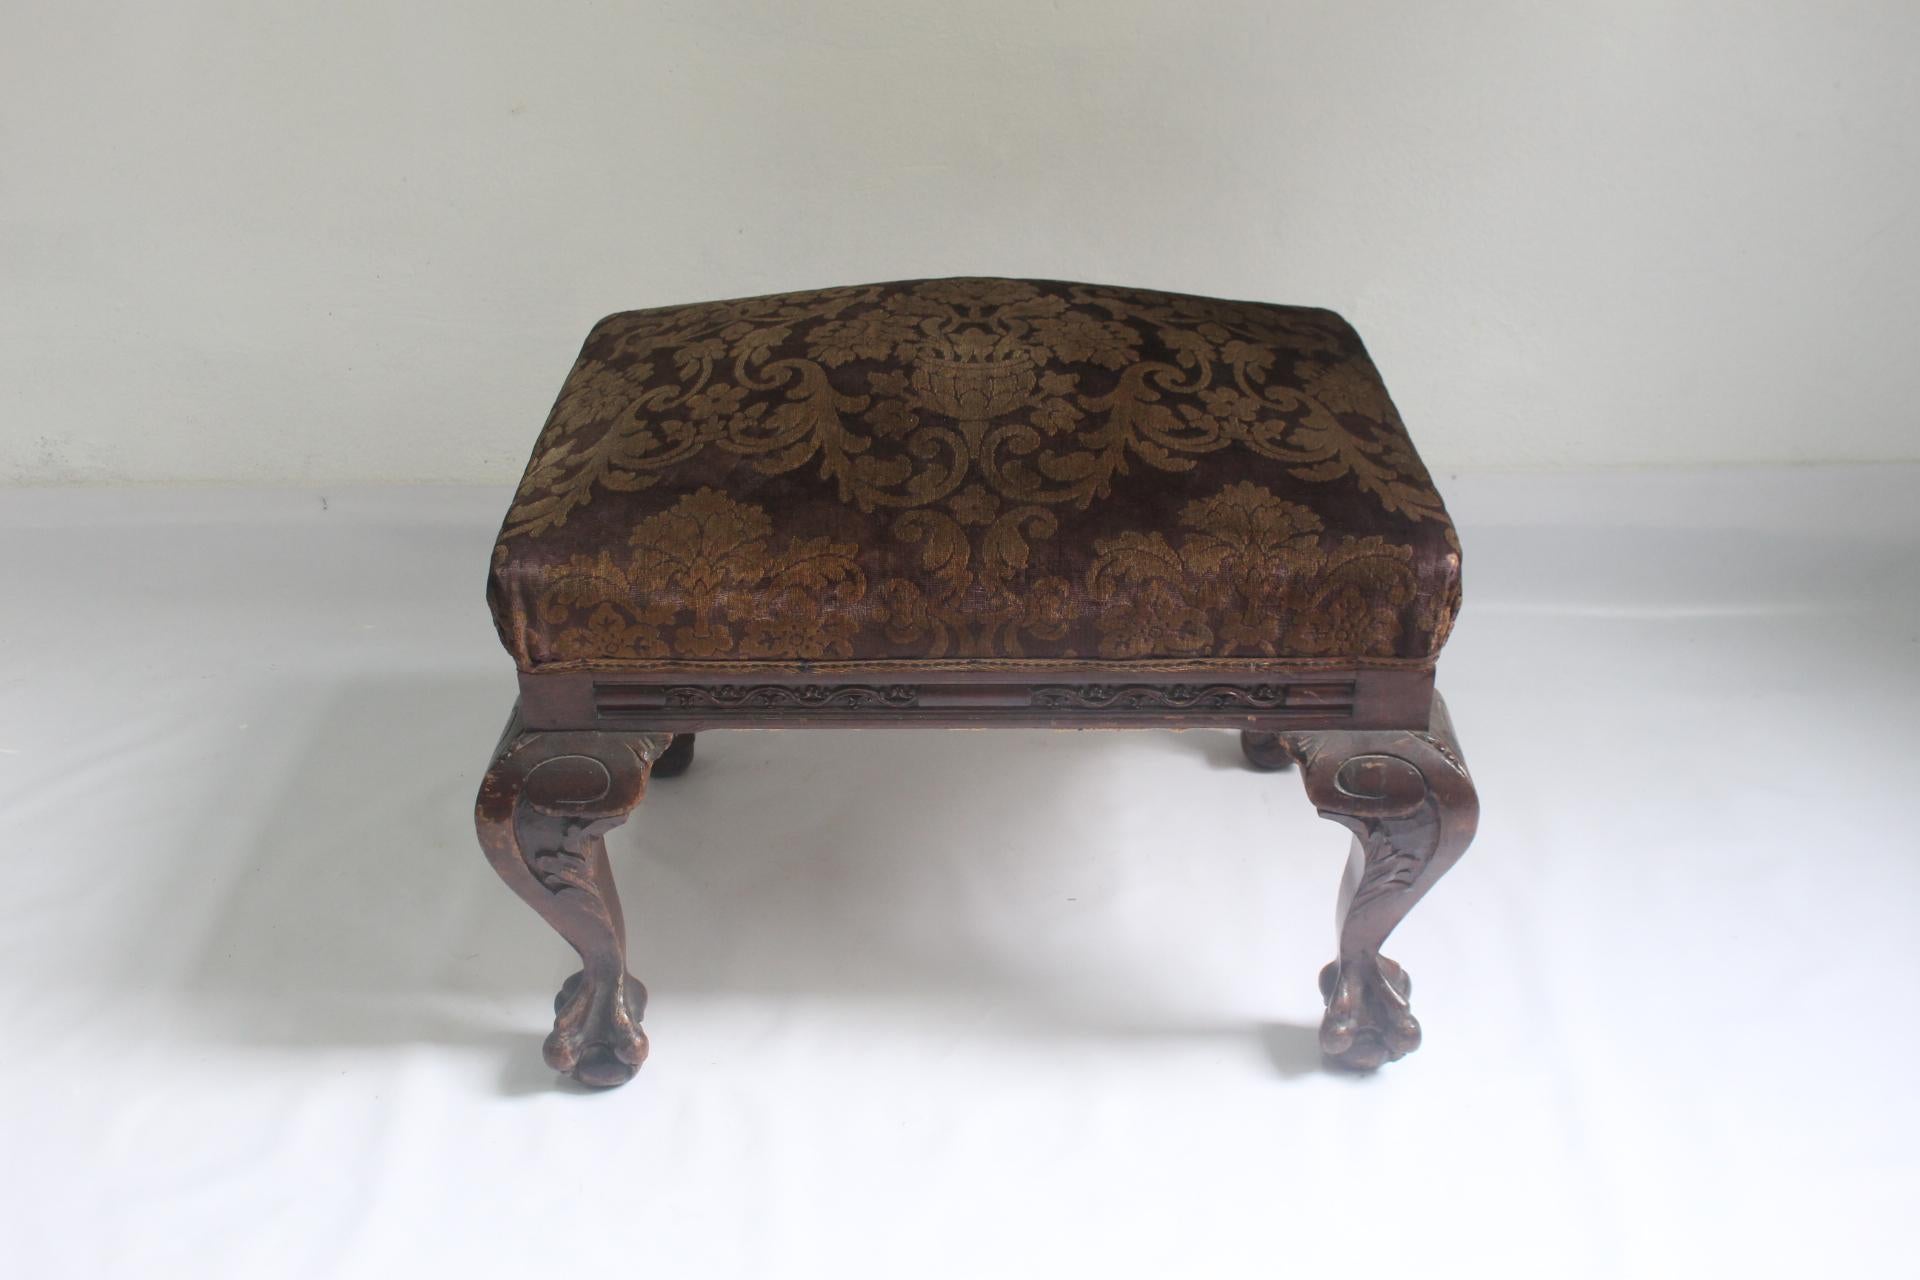 1910s Chippendale Mahogany Ottoman or Stool with Original Velvet Upholstery For Sale 11